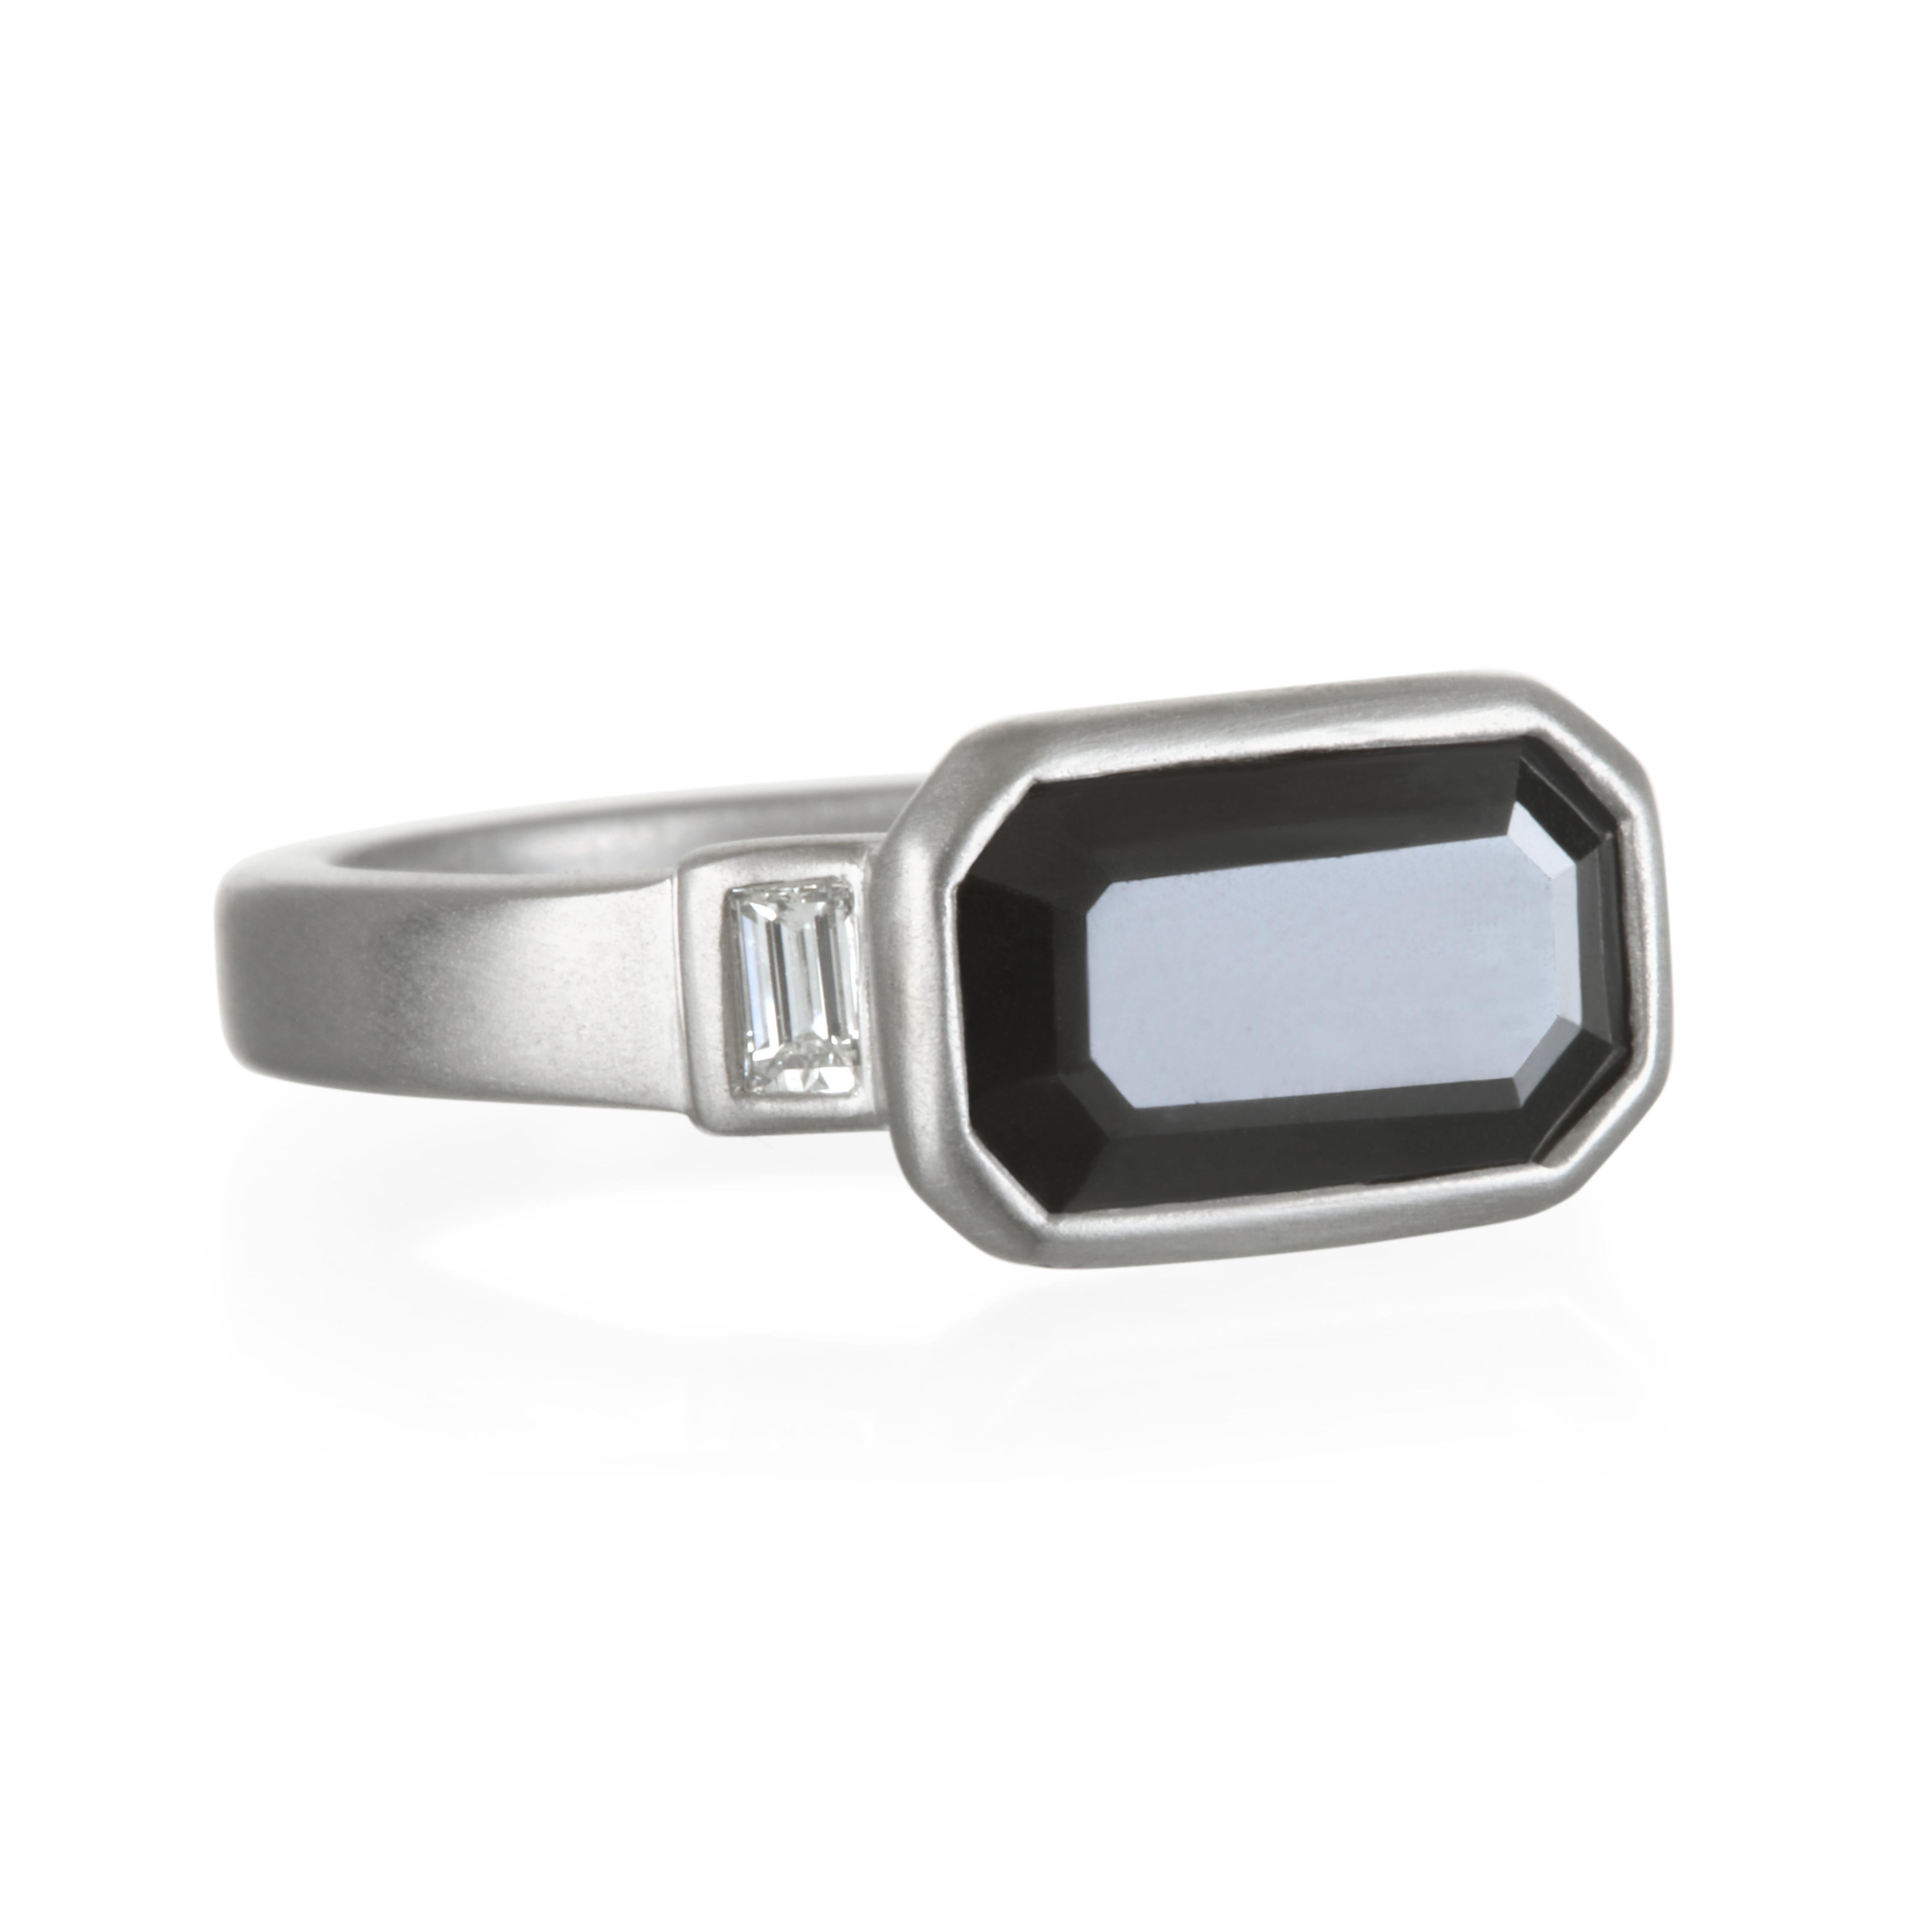 Sophistication and modern matte finish give this diamond ring its true edge and uniqueness.  From minimalist to magnificent, this ring shares the inherent power of emphasizing the spirit and individual style of its wearer.  Black diamond with side